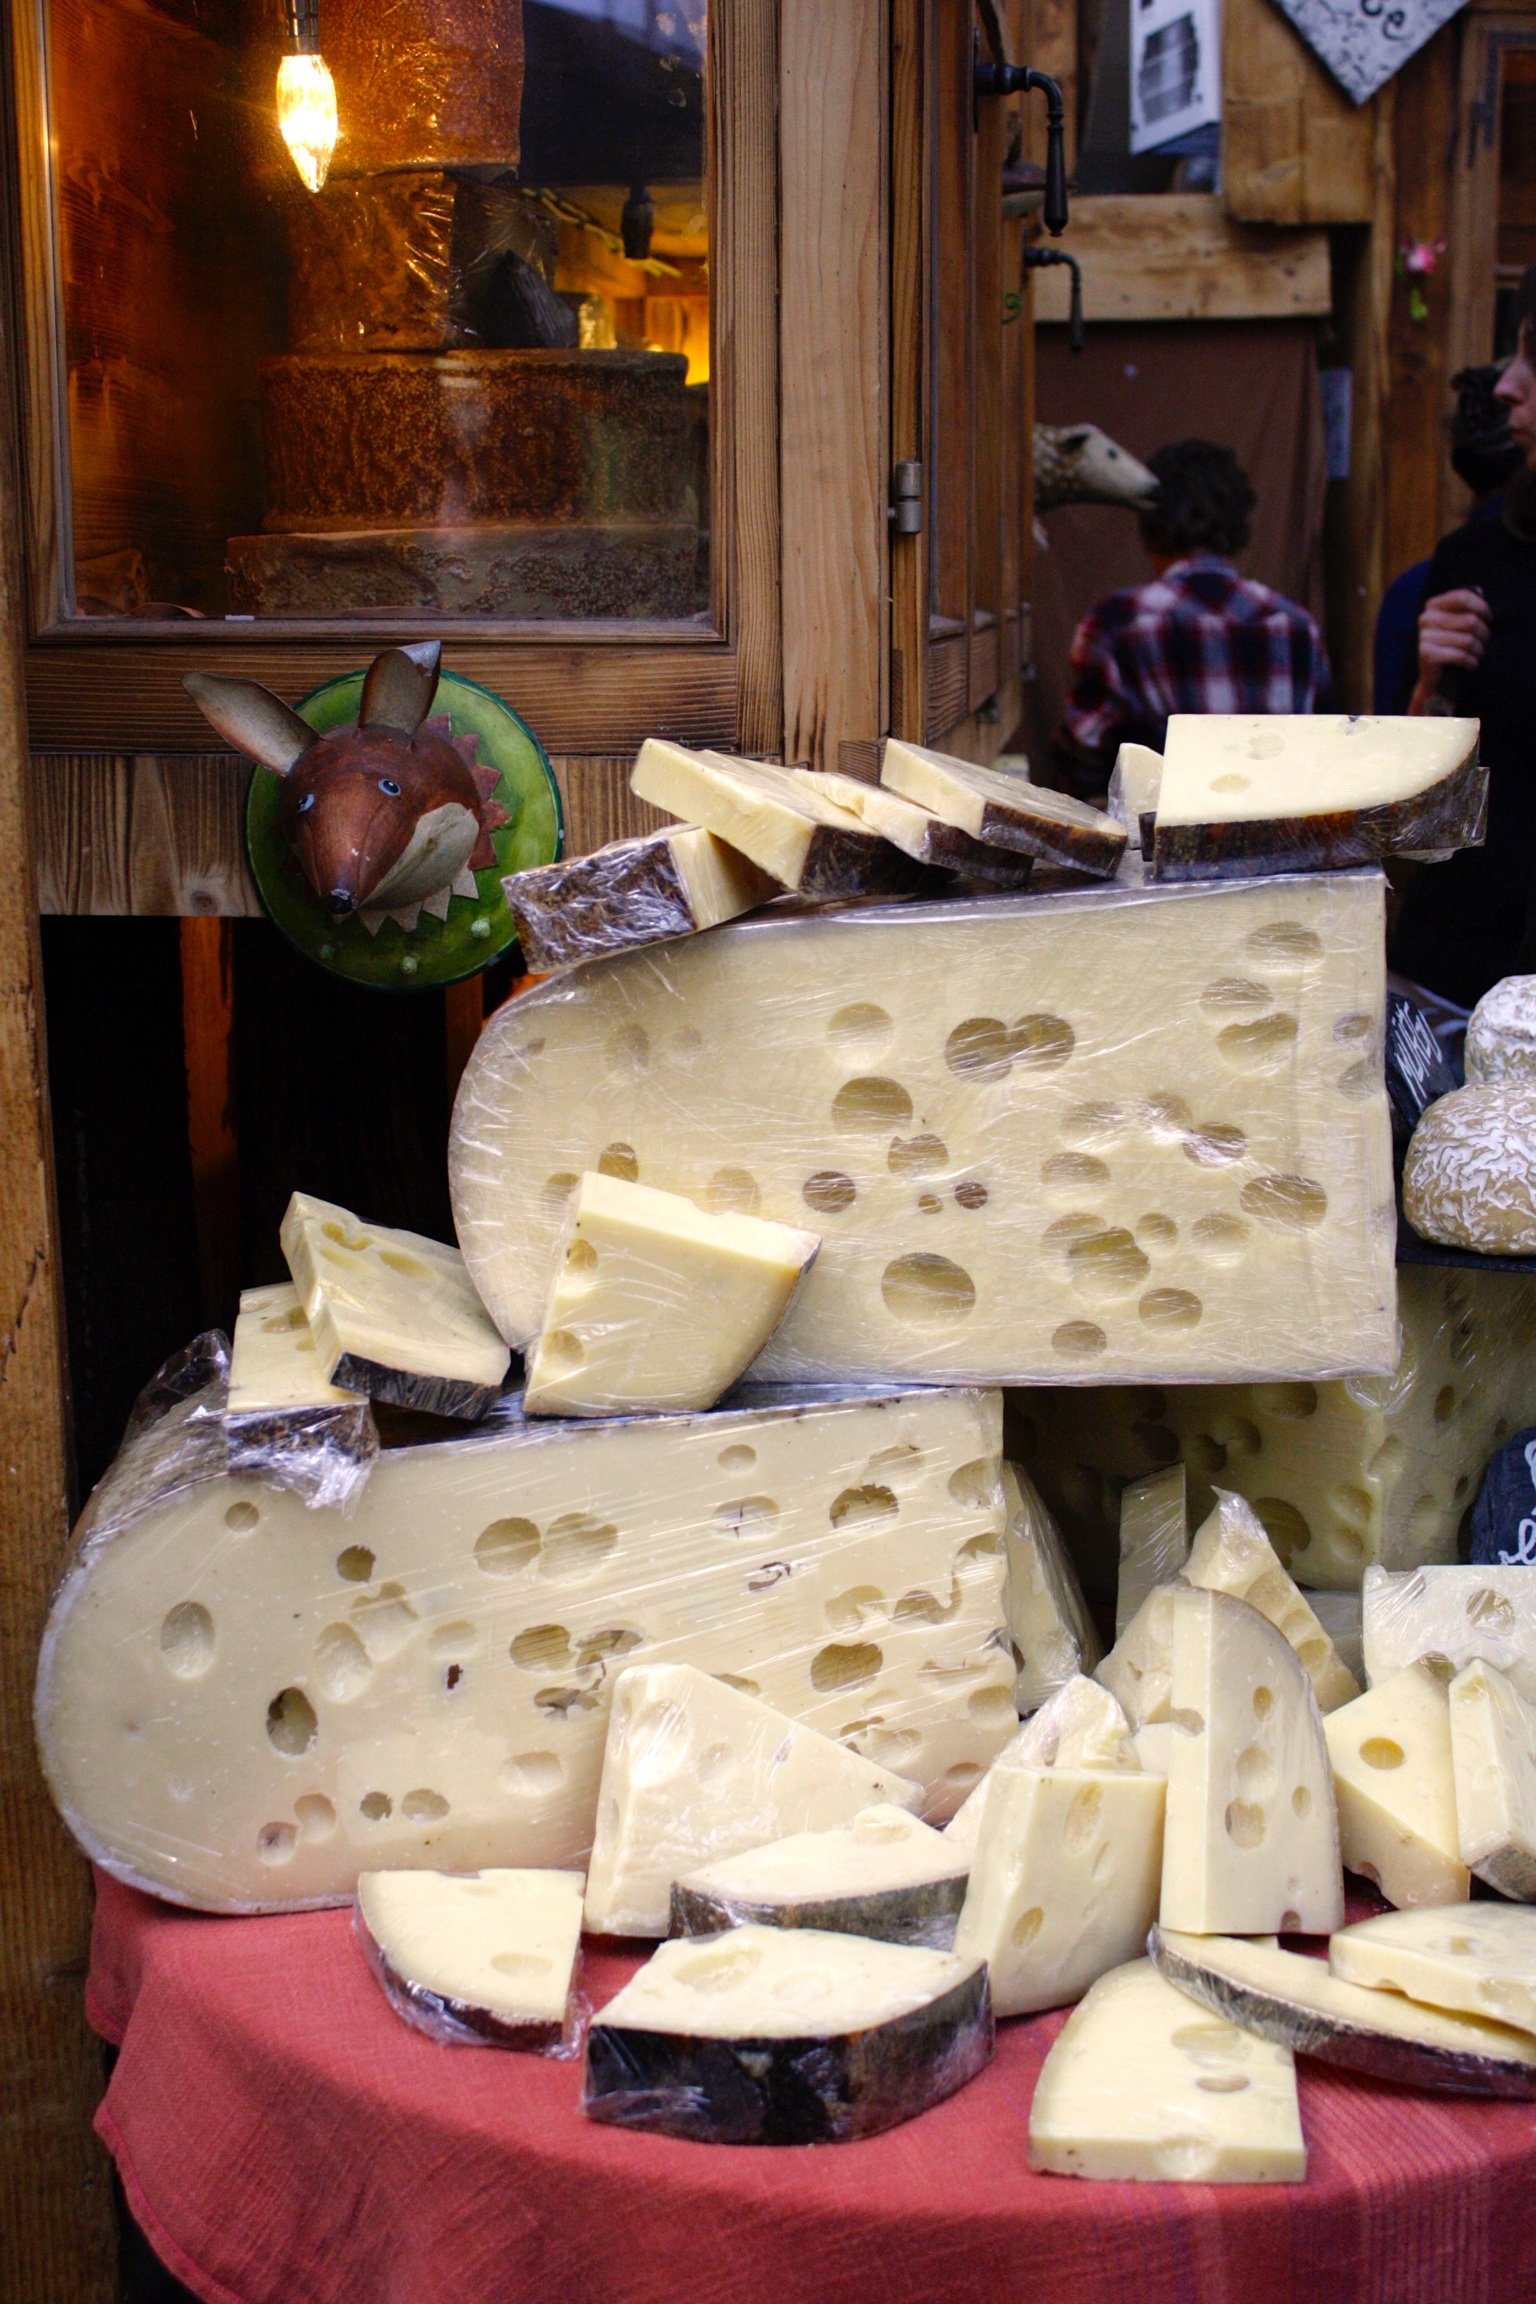 Giant wheels of swiss cheese at Borough Market